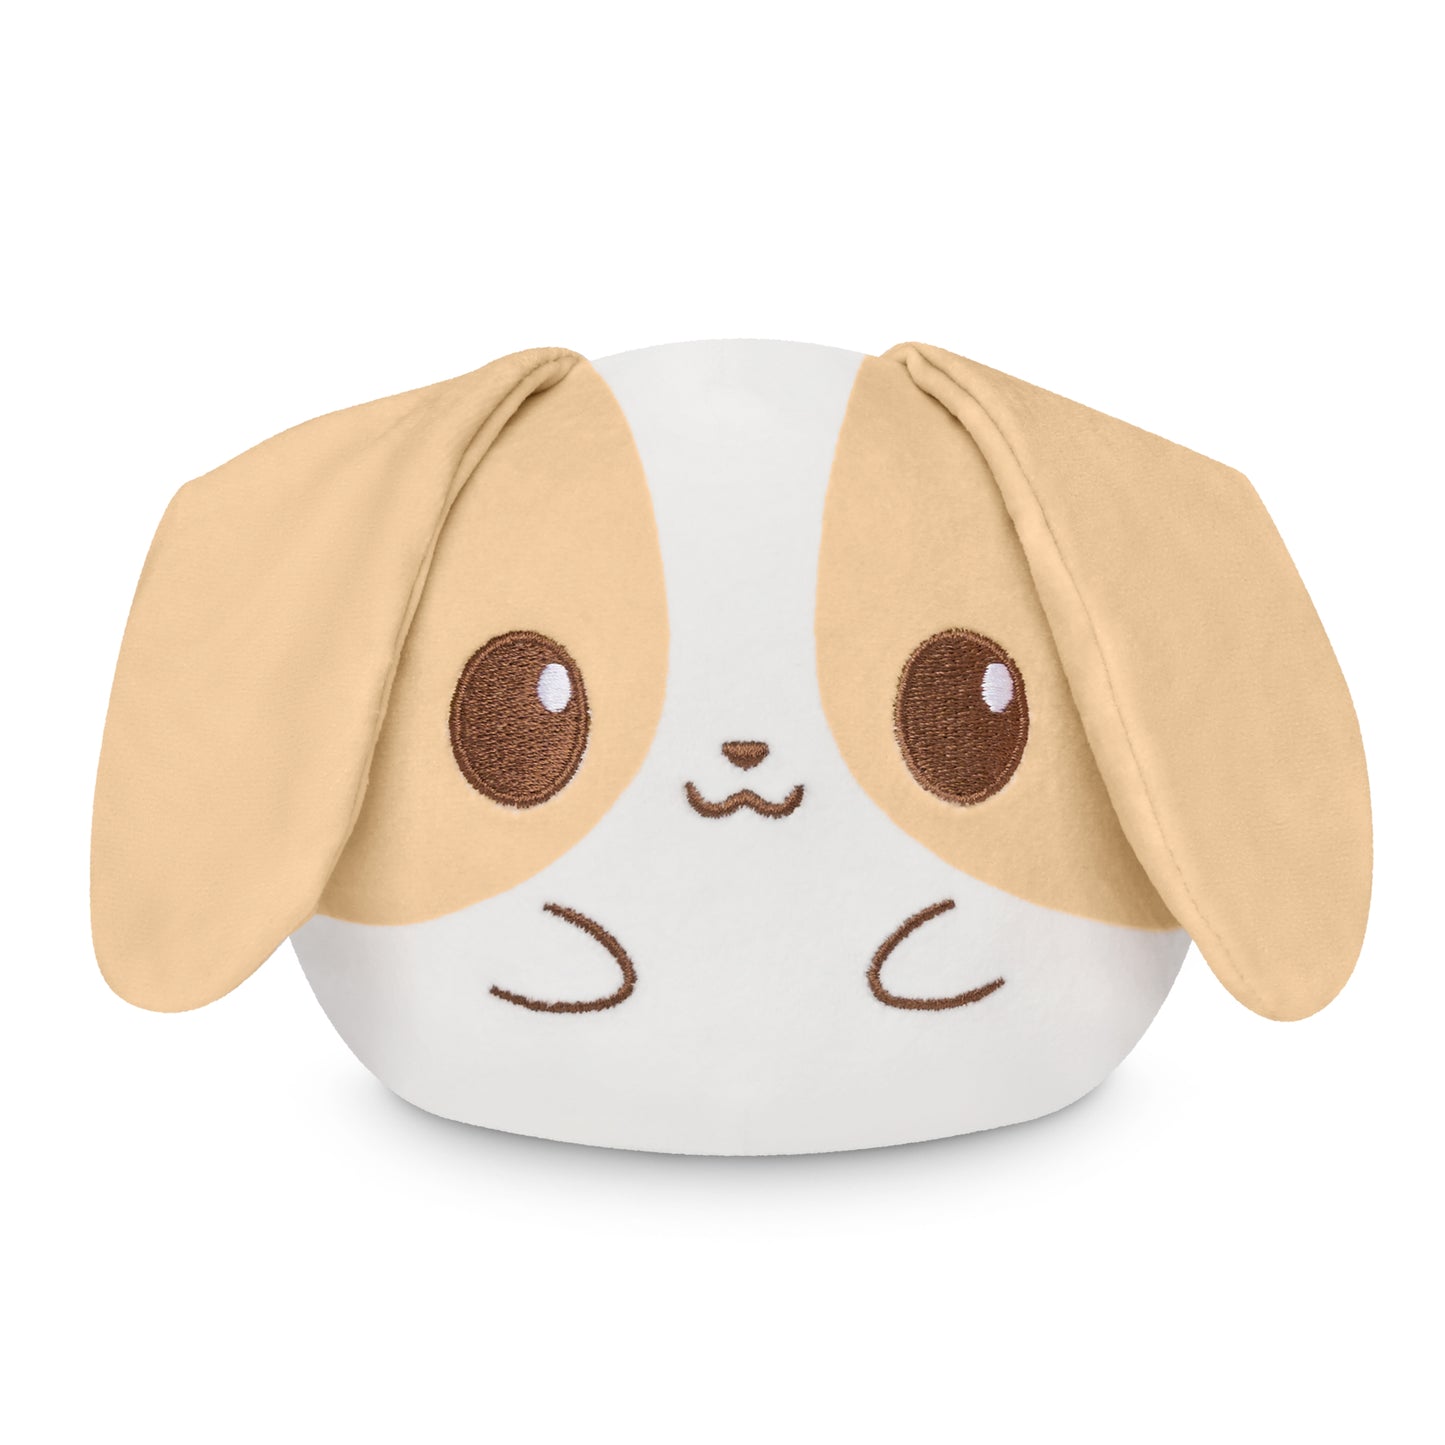 Plushie resembling a Plushiverse Floppy Bunny with large floppy ears.